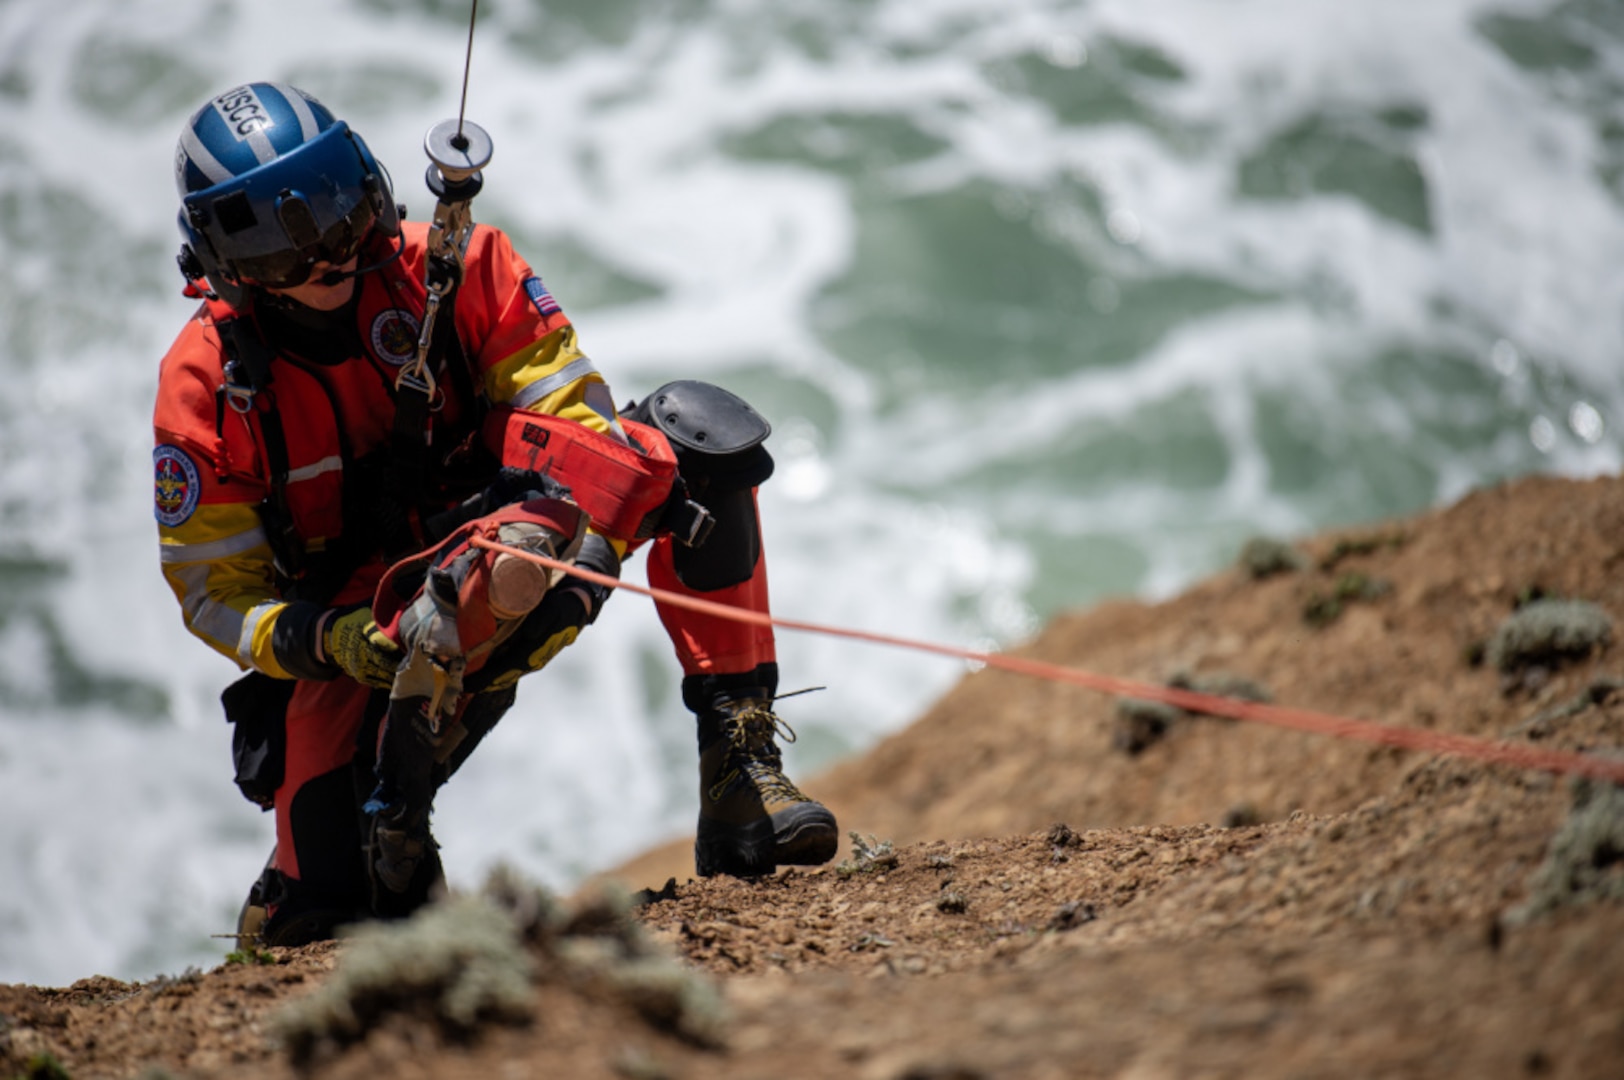 Petty Officer 2nd Class Noah Colburn, an aviation survival technician stationed at Air Station San Francisco, tends to a simulated individual during cliff rescue training Pacifica, Calif., March 30, 2021. Cliff rescue training is one of many exercise crews use to stay proficient in all mission capabilities. (U.S. Coast Guard Photo by Petty Officer 3rd Class Taylor Bacon)